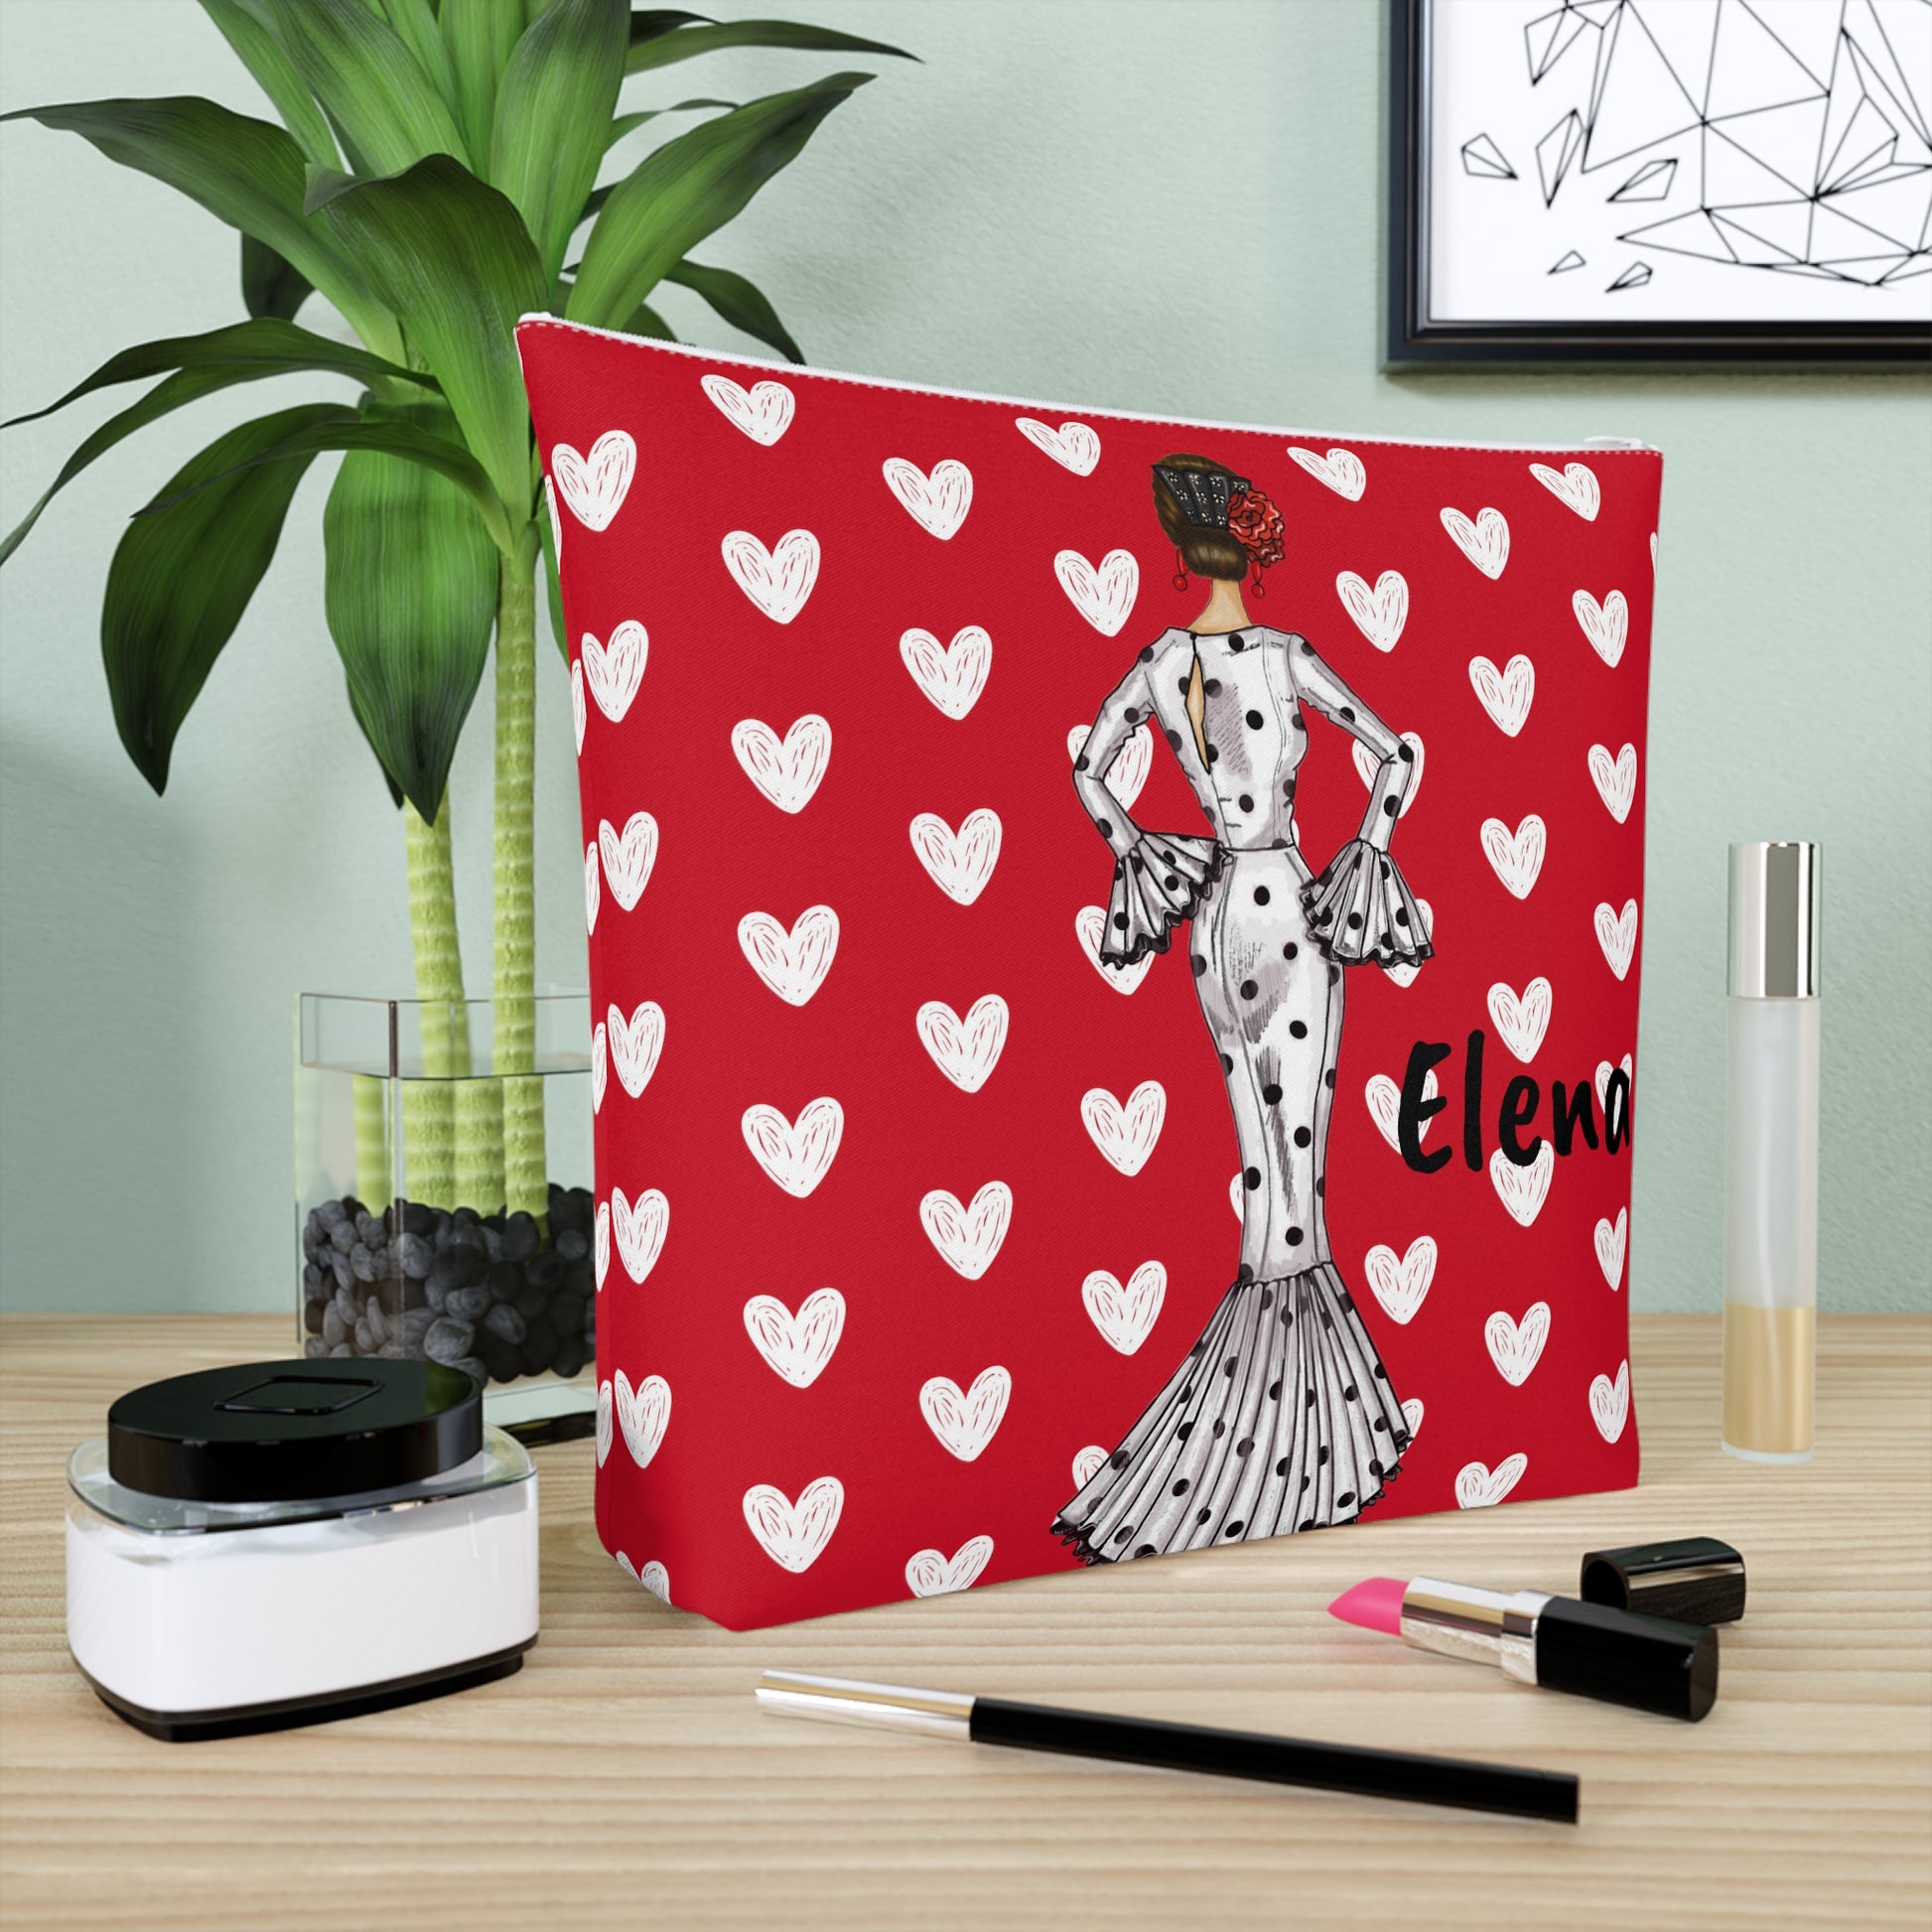 a picture of a dalmatian dog on a red background with hearts